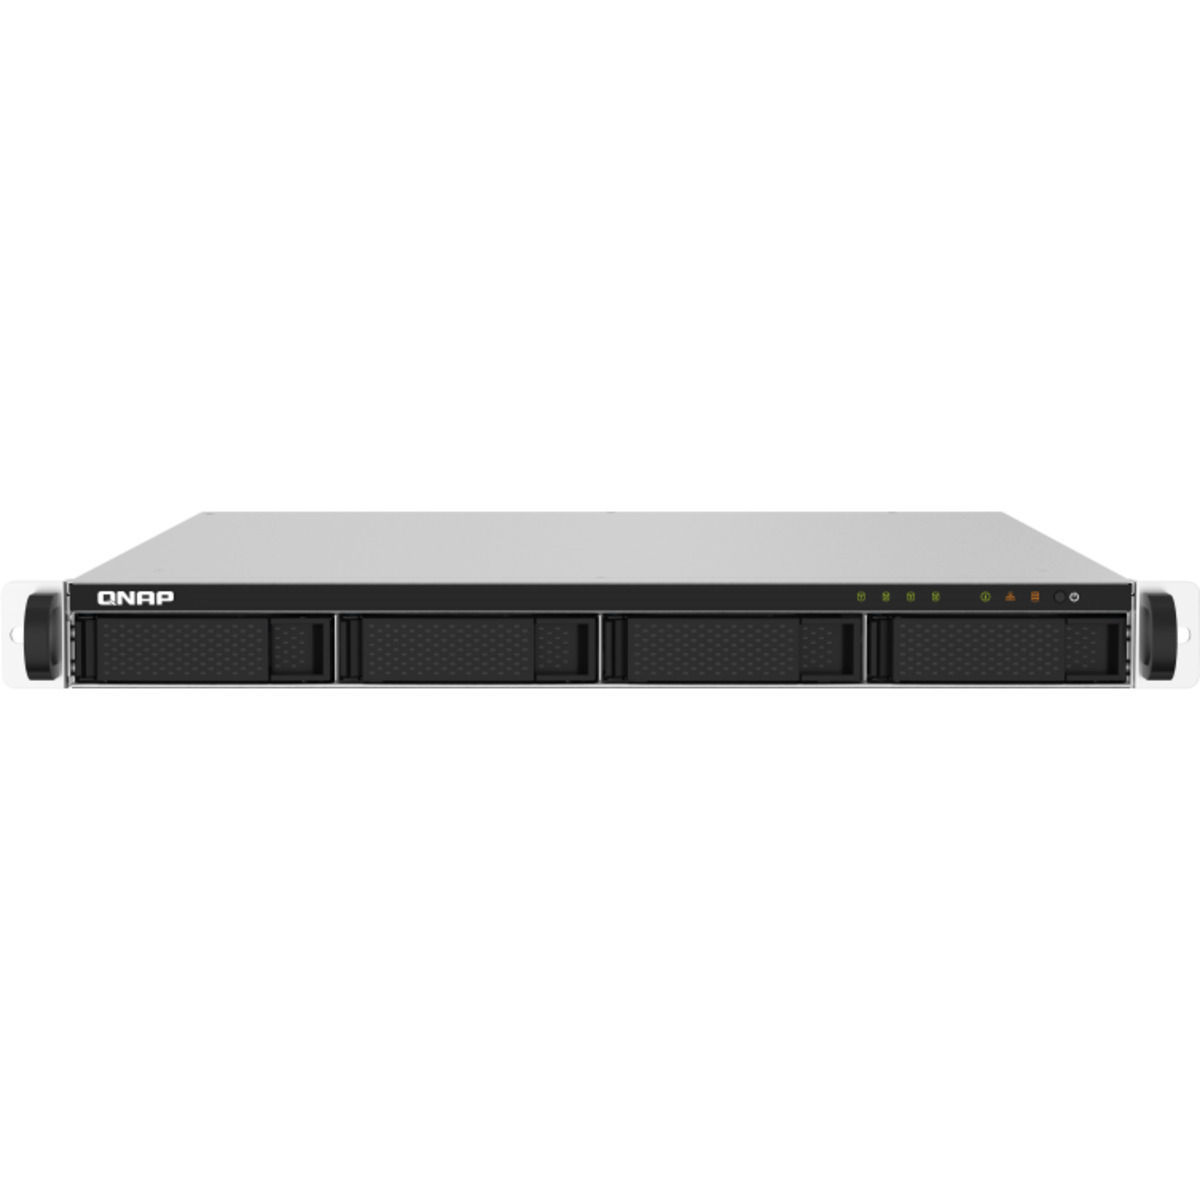 buy $1597 QNAP TS-432PXU-RP 4tb RackMount NAS - Network Attached Storage Device 4x1000gb Samsung 870 QVO MZ-77Q1T0 2.5 SATA 6Gb/s SSD CONSUMER Class Drives Installed - Burn-In Tested - FREE RAM UPGRADE - nas headquarters buy network attached storage server device das new raid-5 free shipping usa TS-432PXU-RP